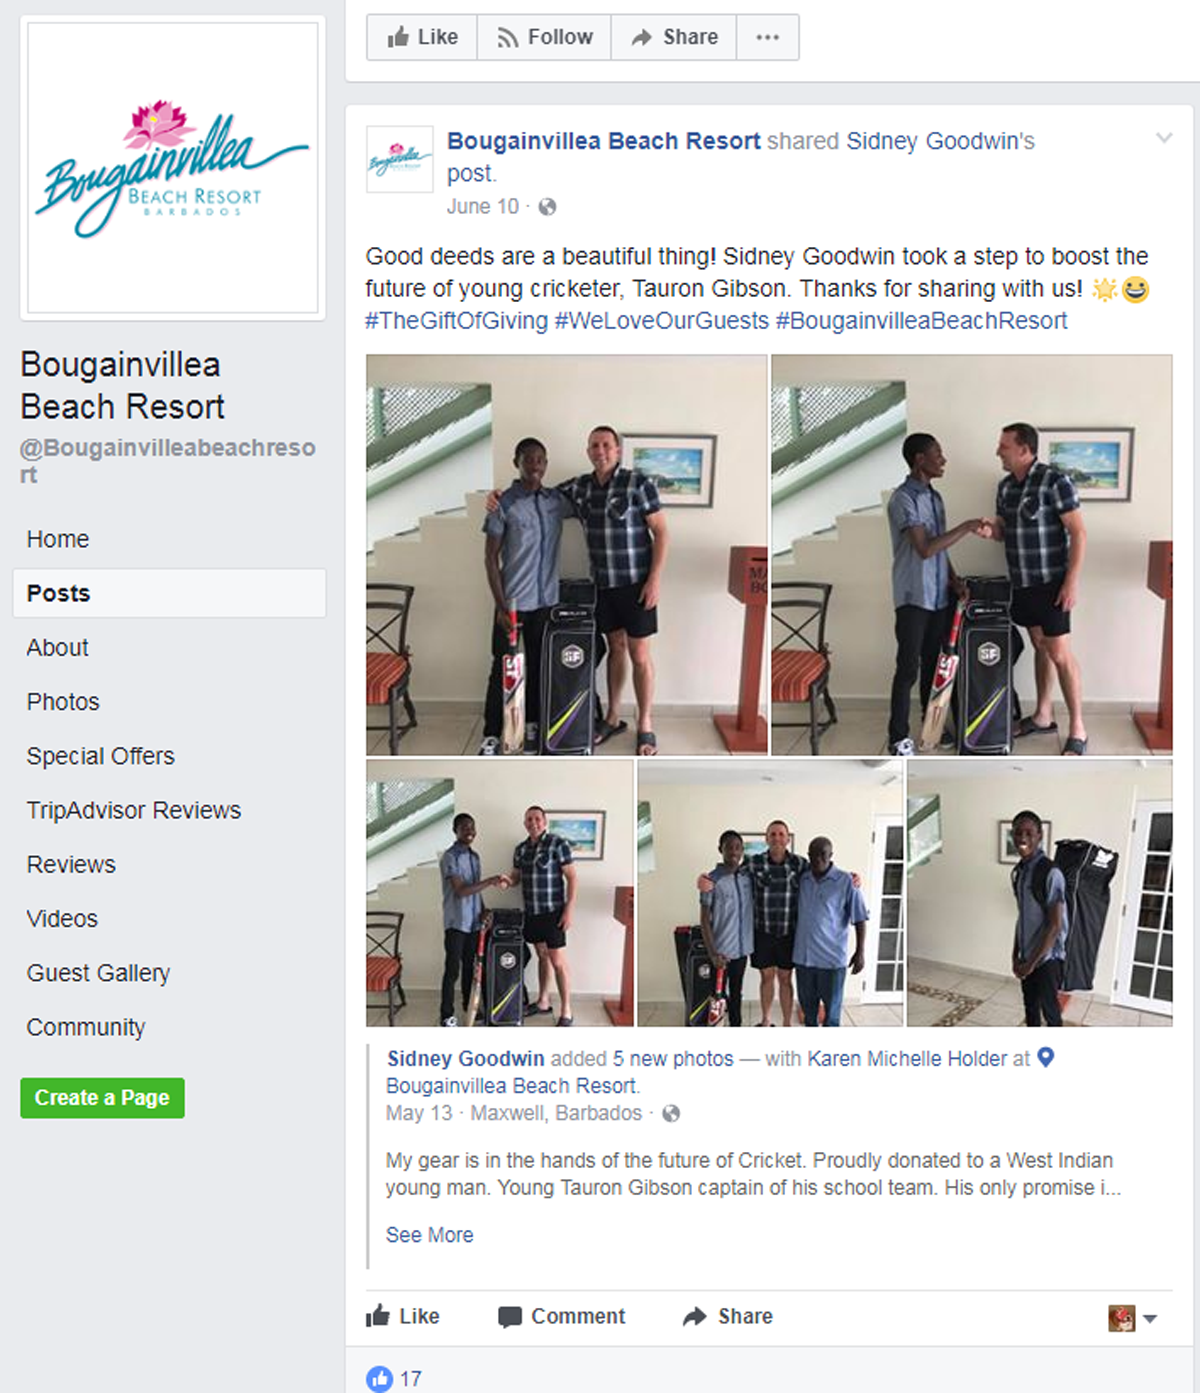 user-generated content facebook post by th bougainvillea beach resort